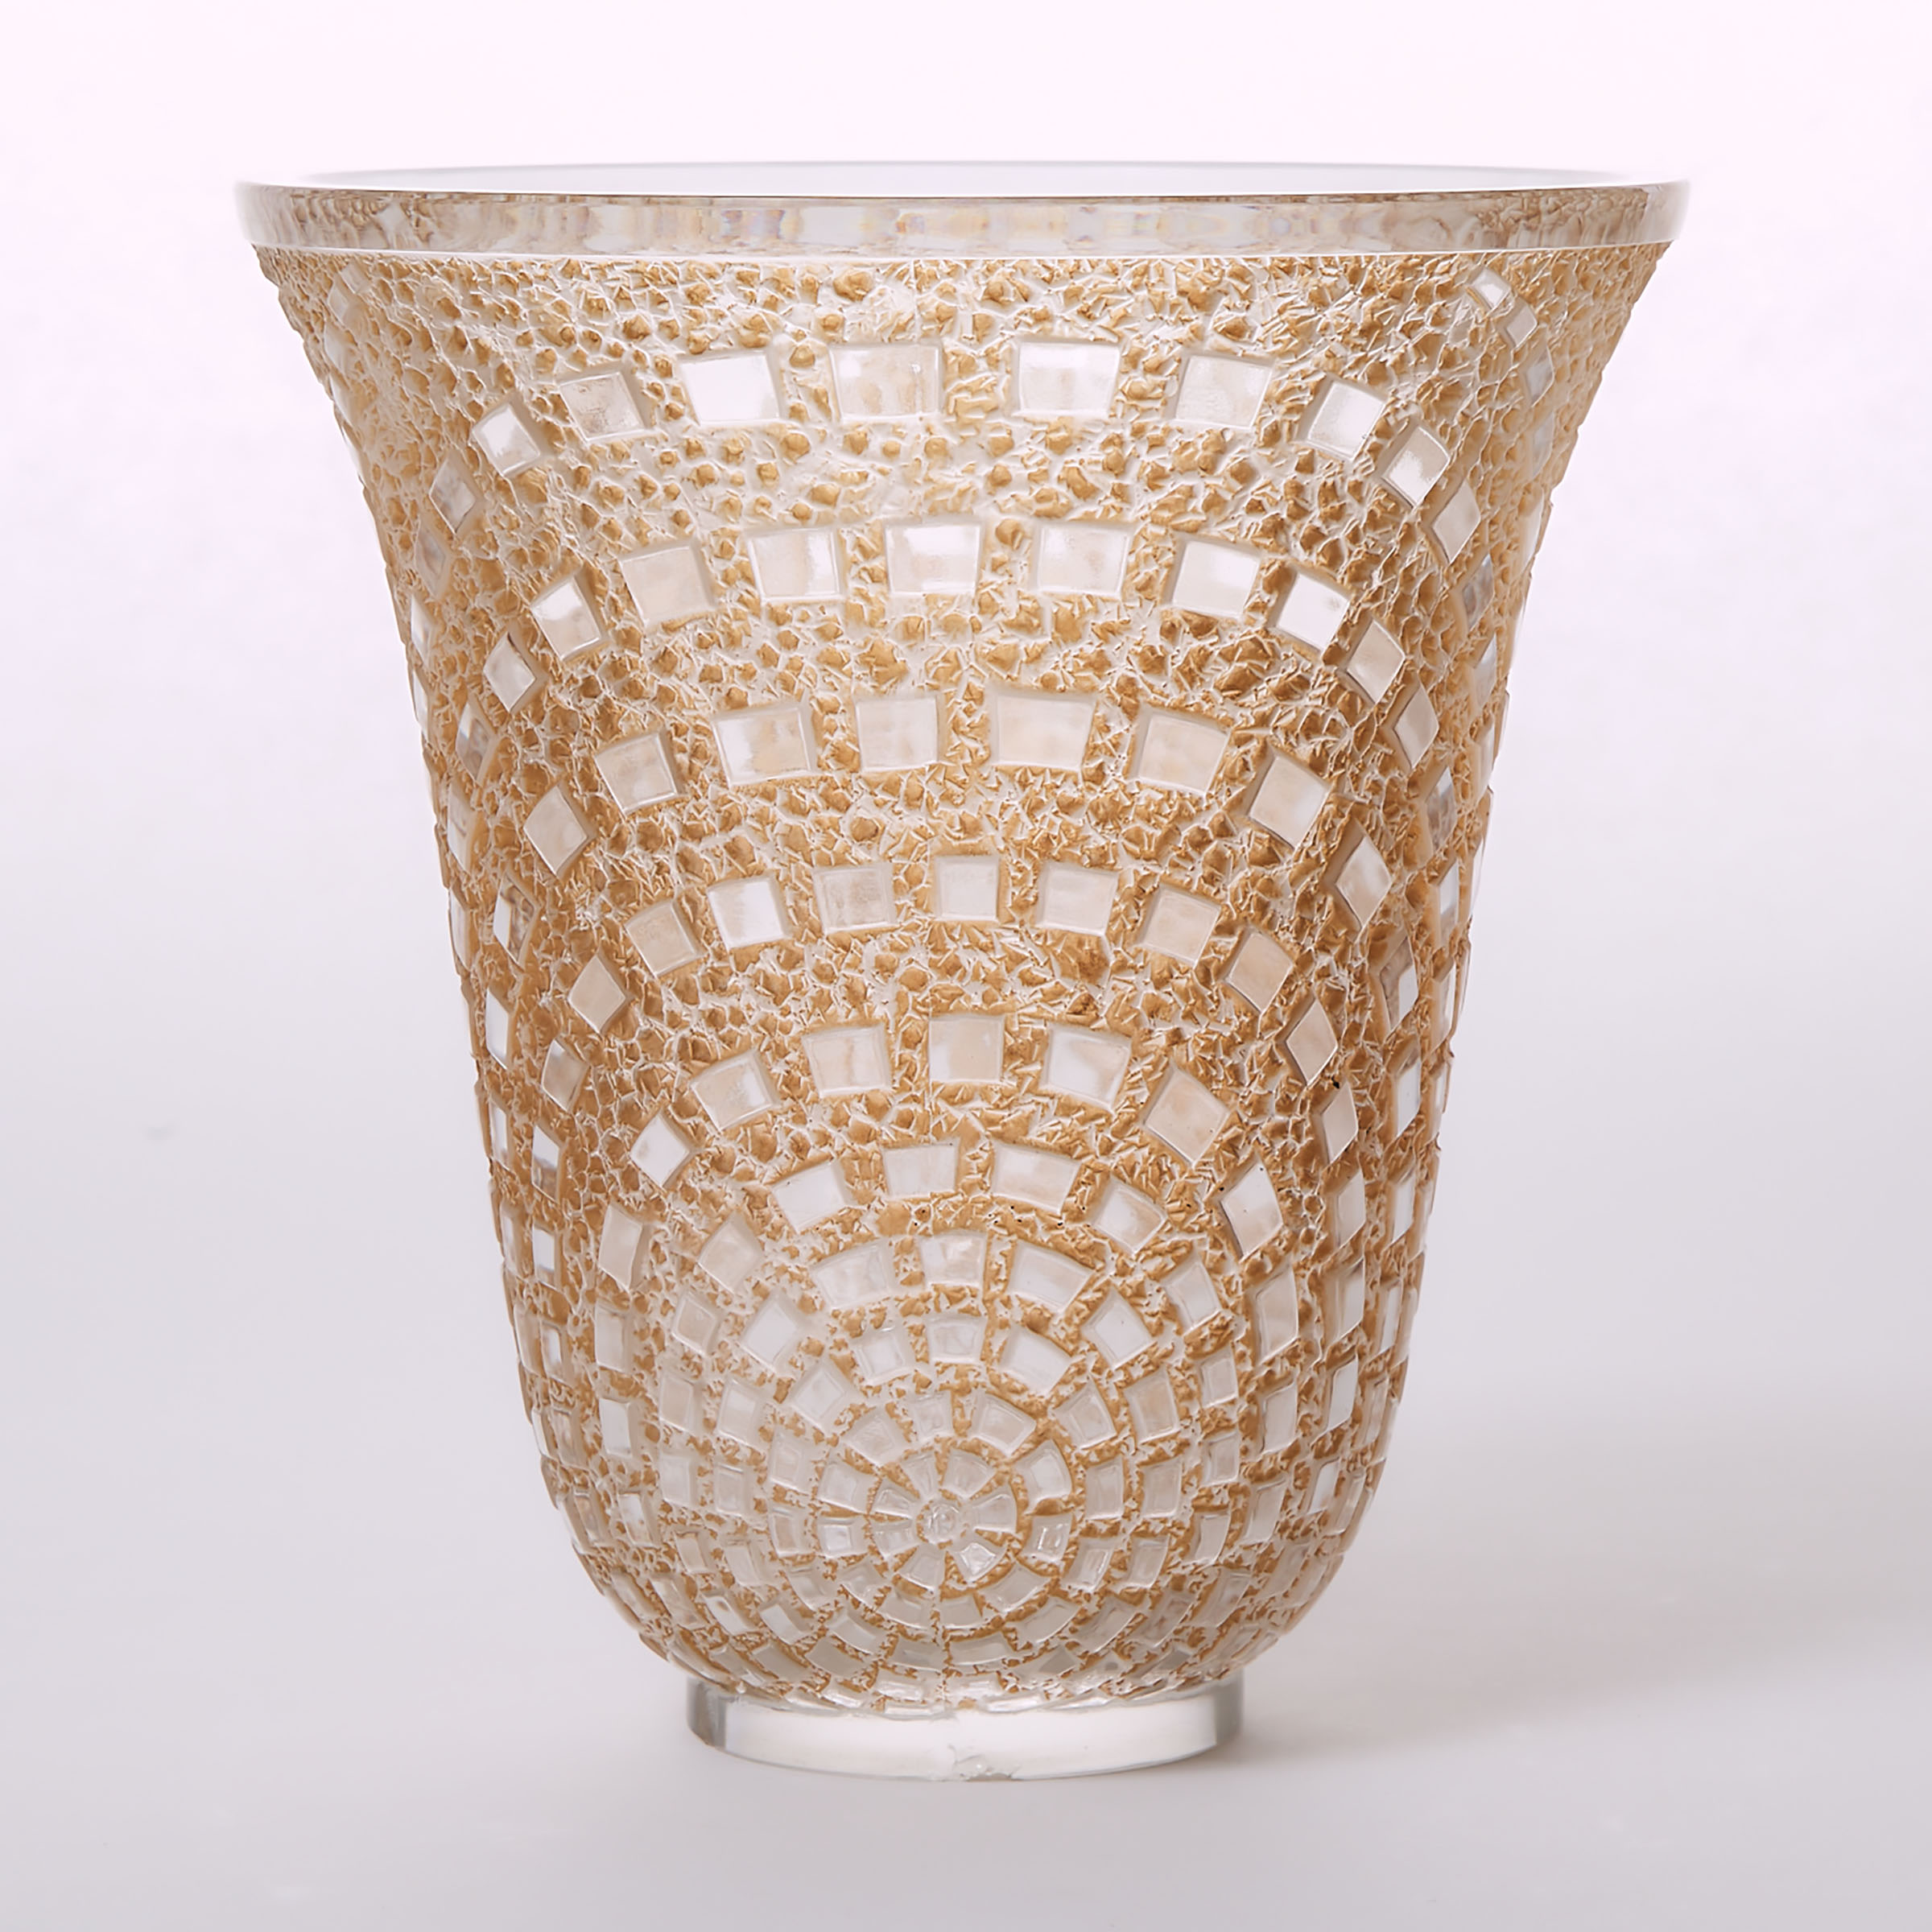 'Damiers', Lalique Moulded and Frosted Glass Vase, 1930s